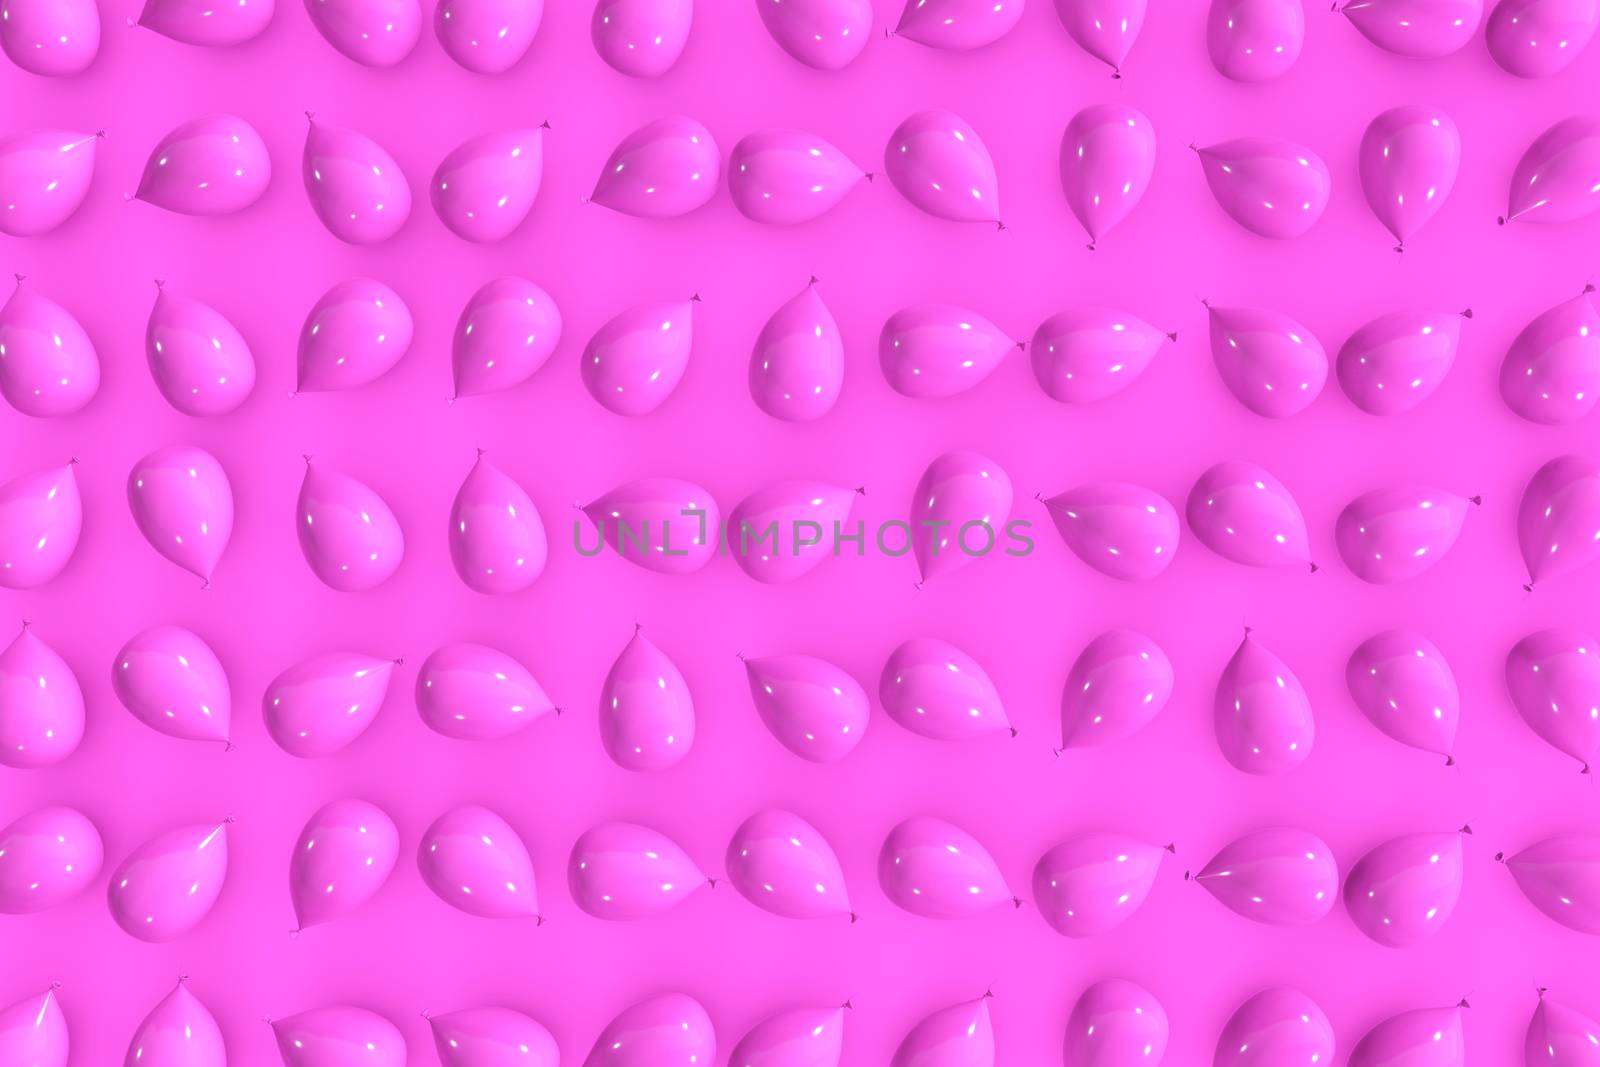 Pink baloons background 3d rendering by F1b0nacci